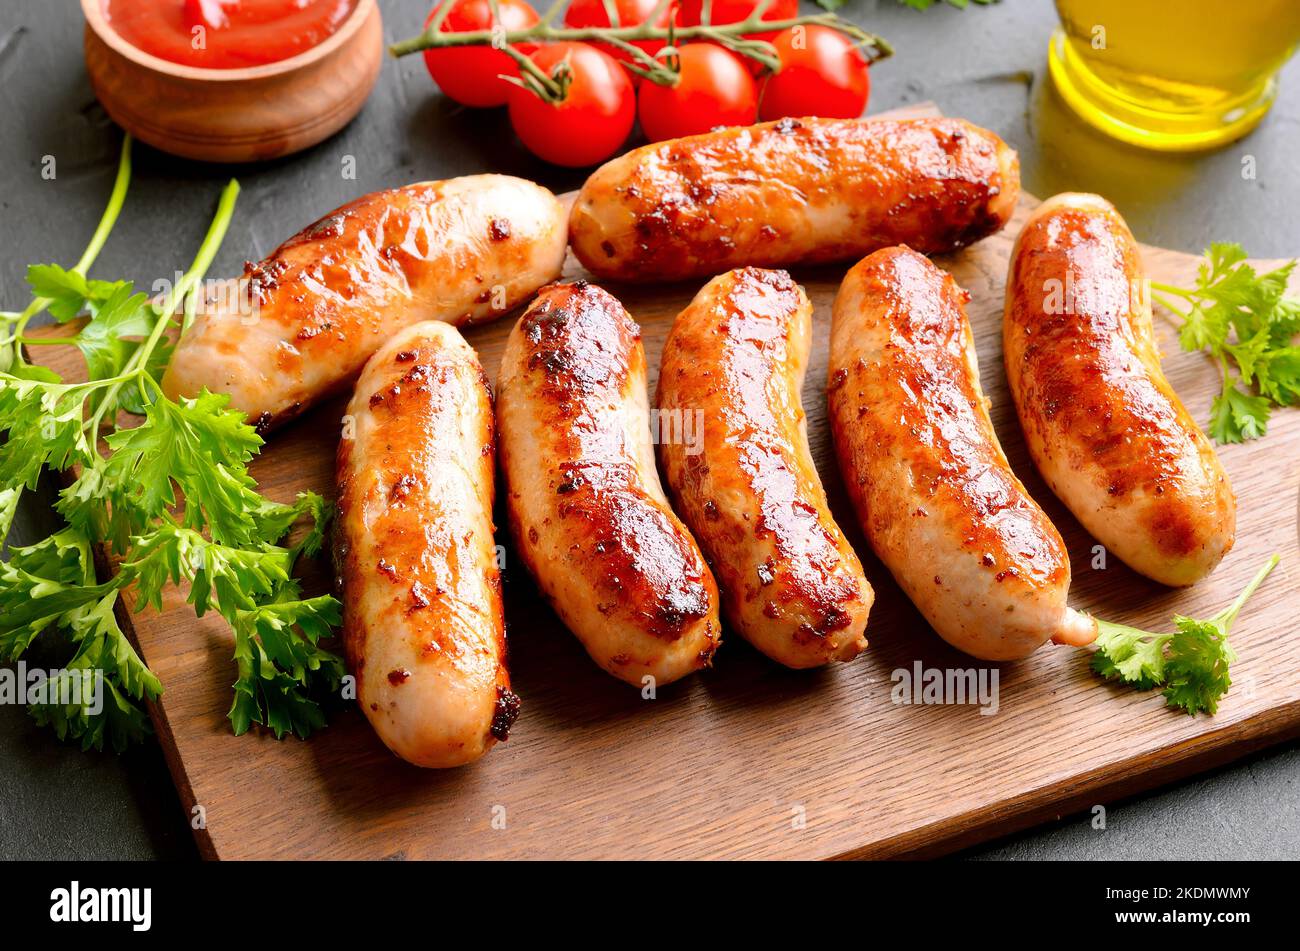 Homemade fried bratwurst on cutting board, close up view Stock Photo